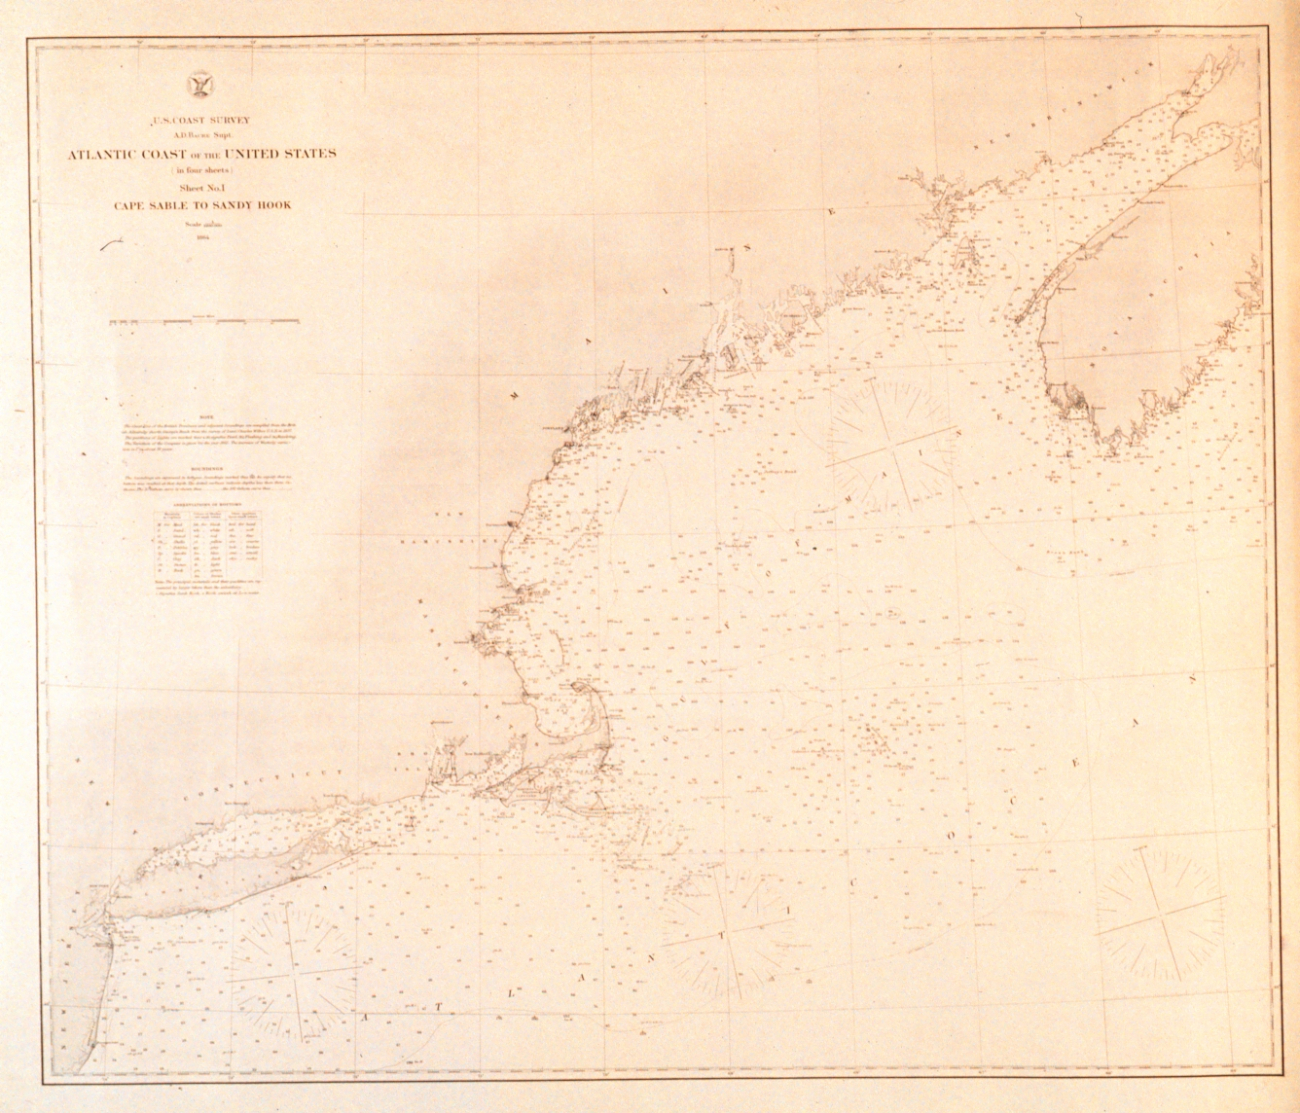 Nautical chart of Cape Sable to Sandy Hook, 1864